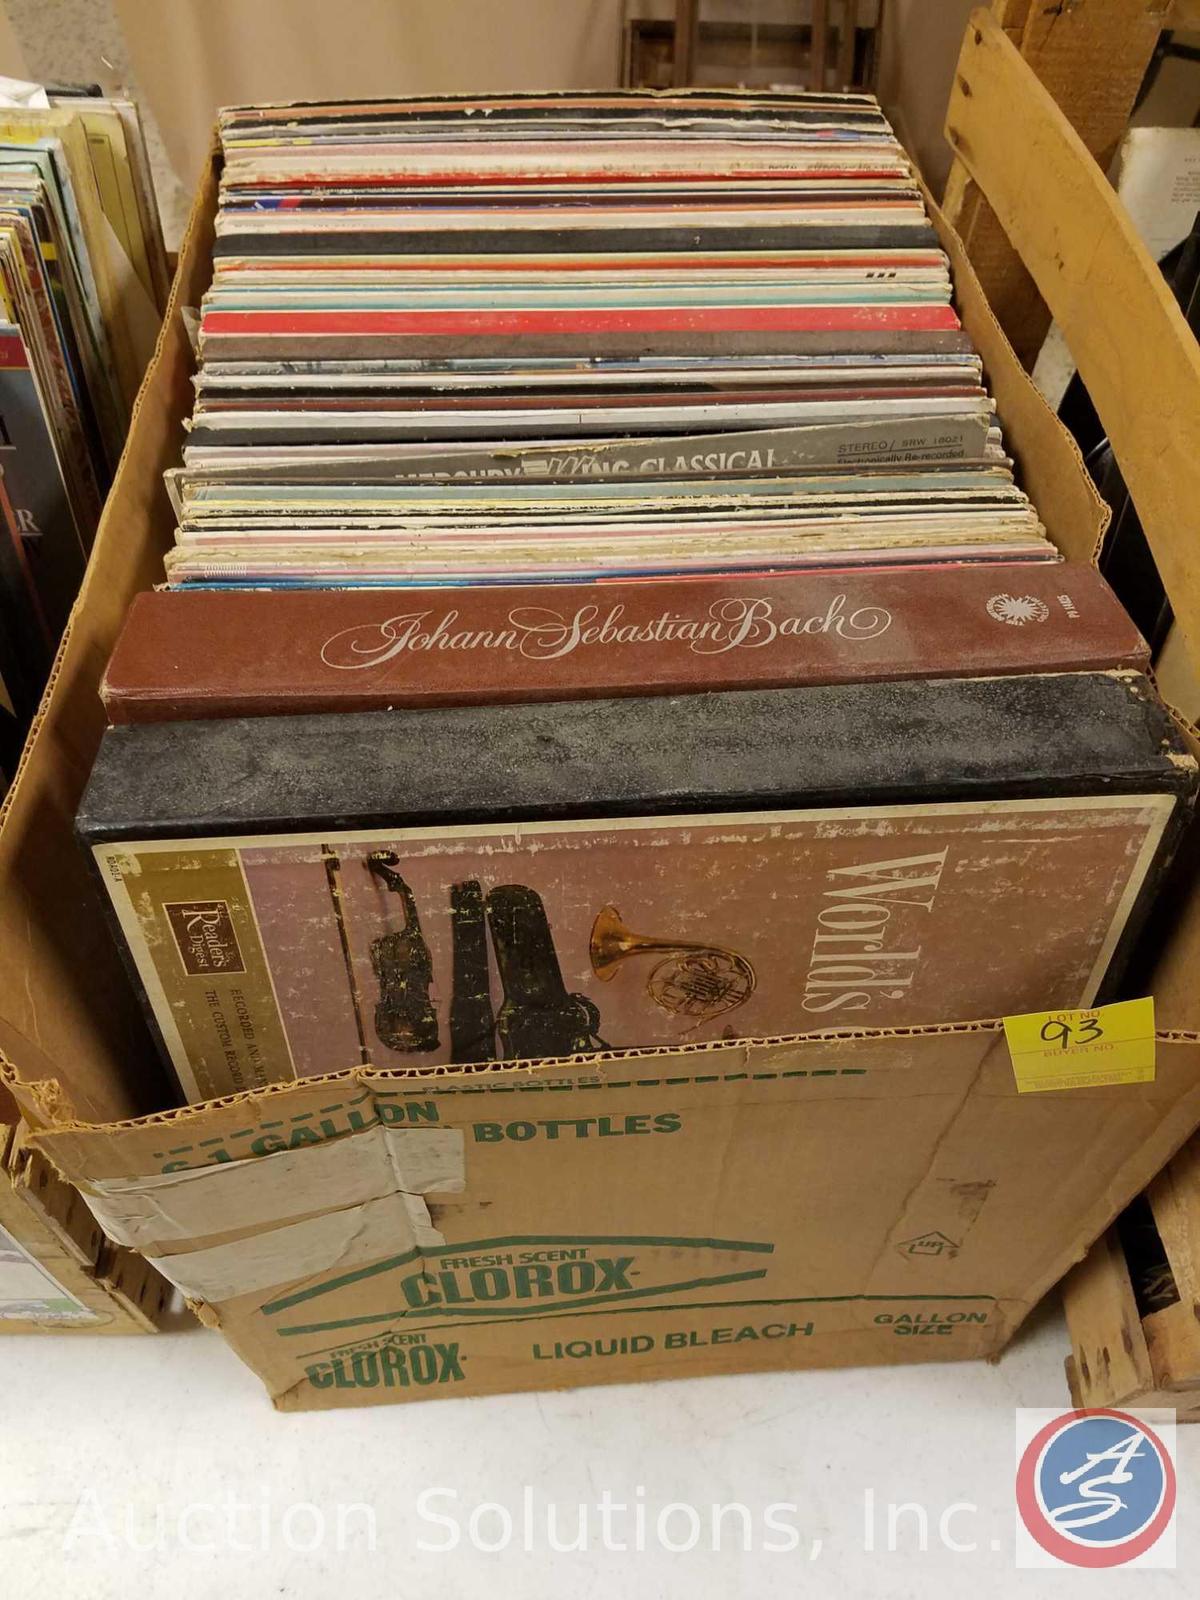 Vintage Records including: My Fair Lady, Kismet Alfred Drake, Hello Dolly, and more